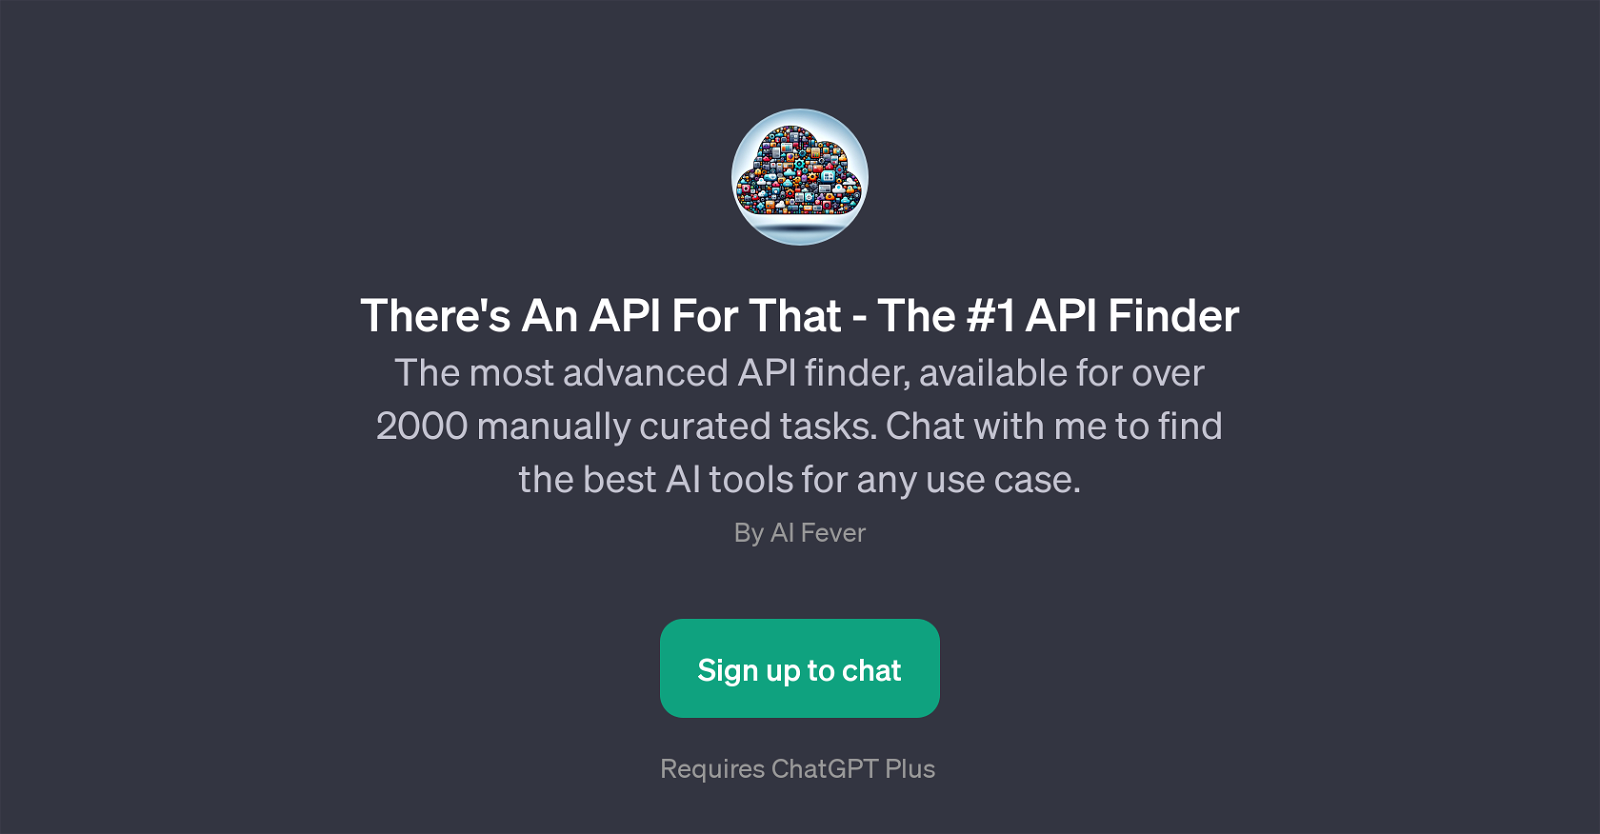 There's An API For That website